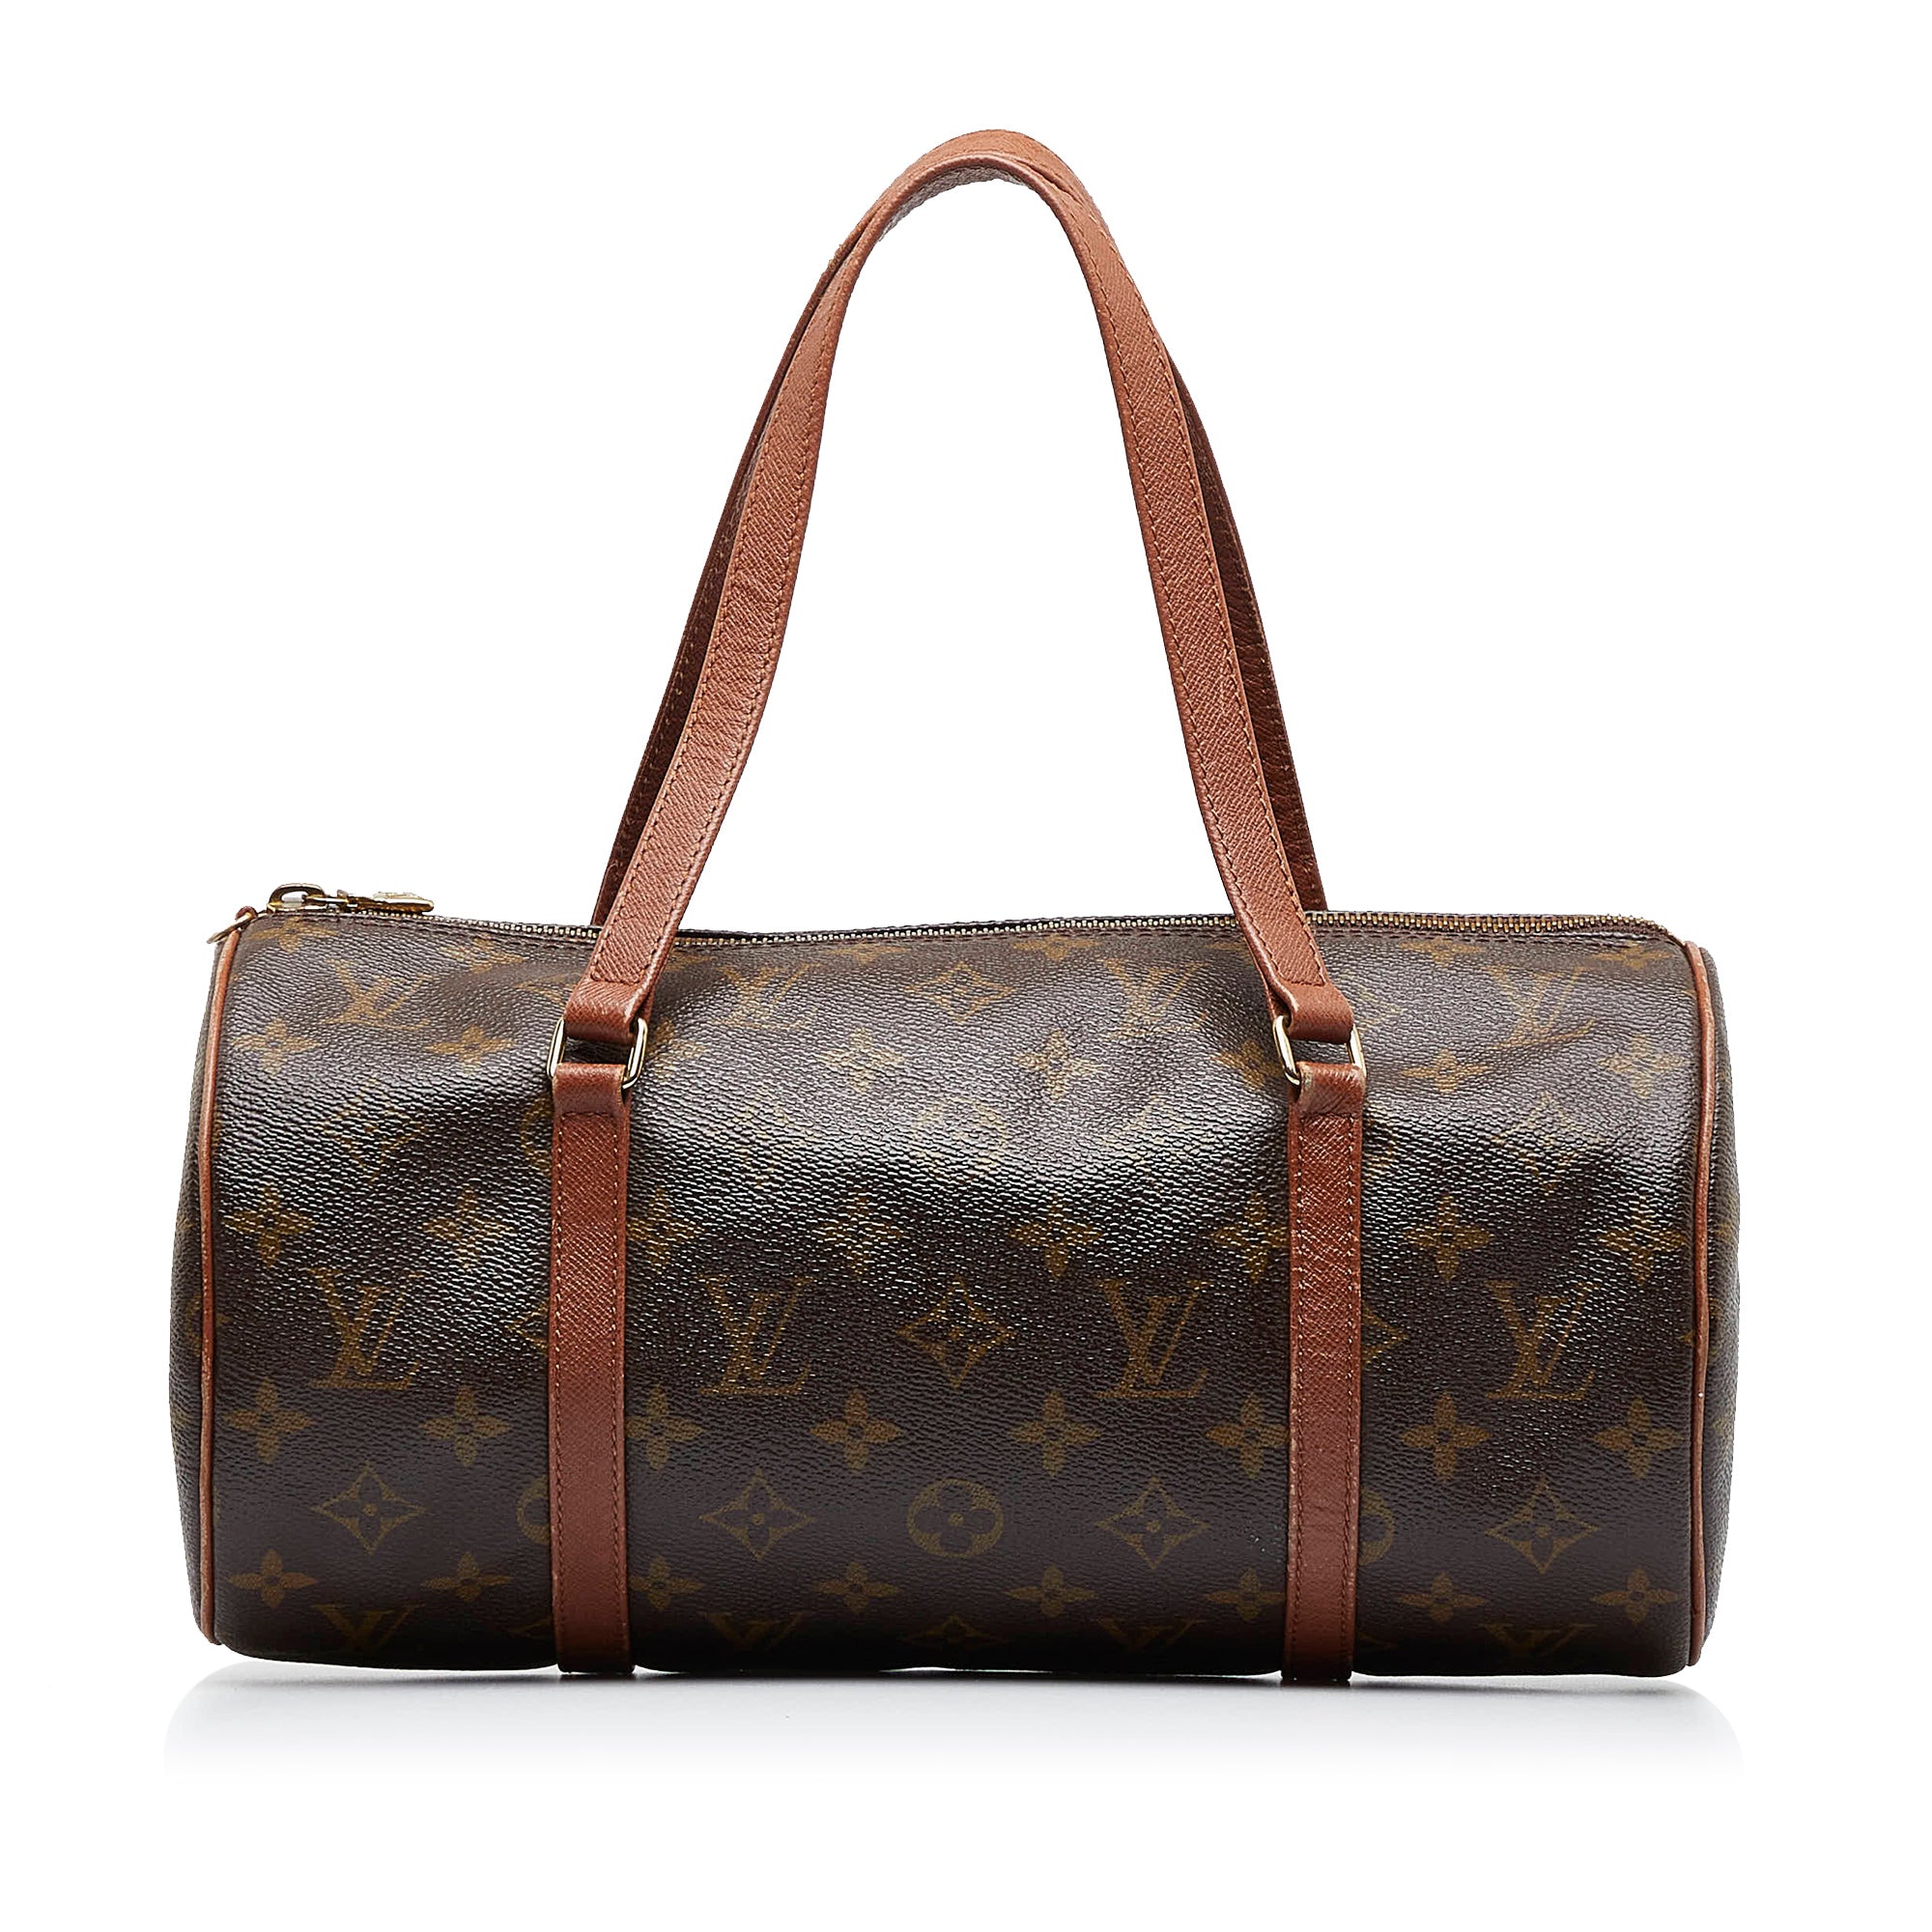 Keepall Louis Vuitton (version in Monogram canvas) and Moschino gloves!